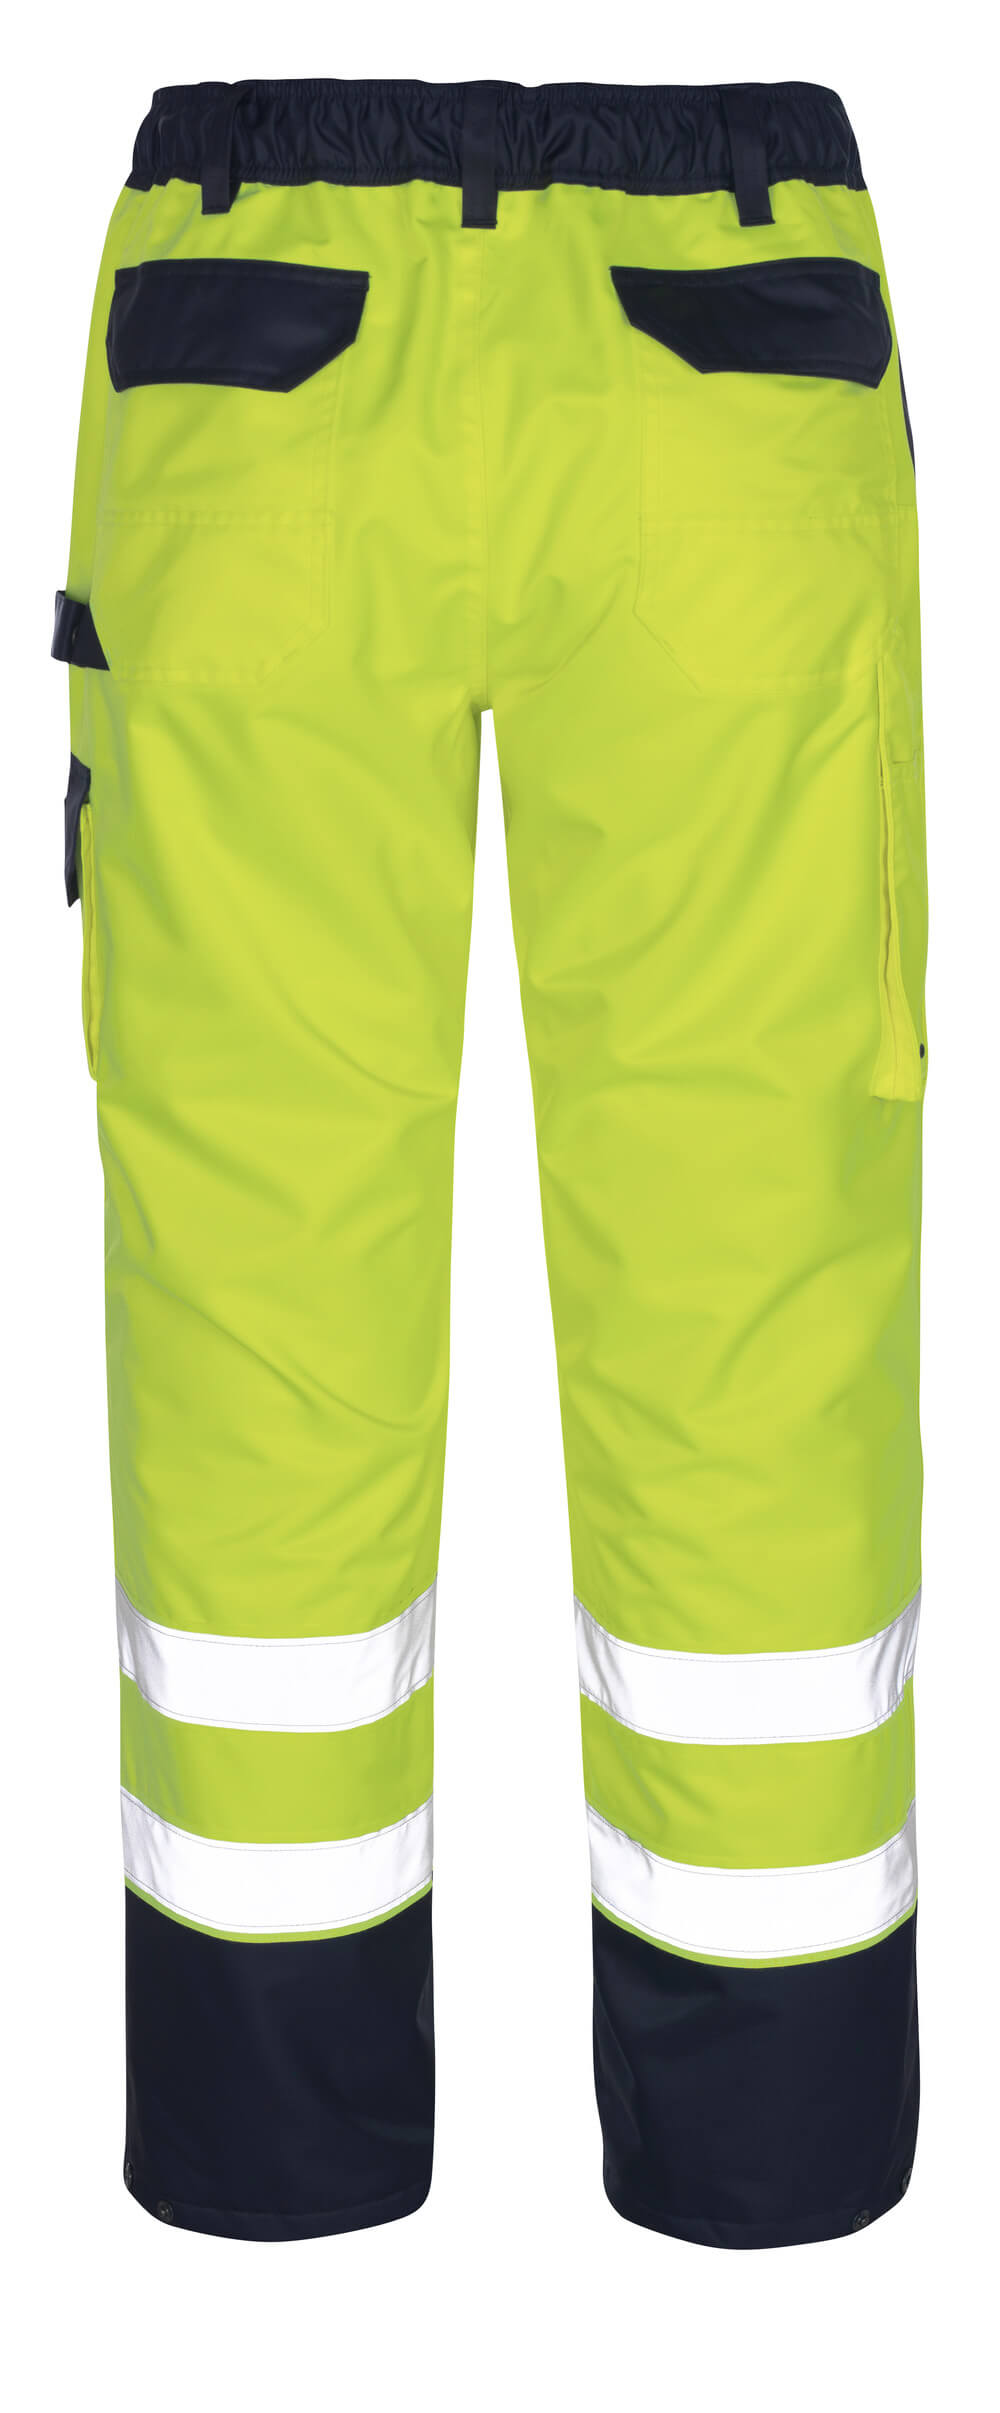 Mascot SAFE IMAGE  Linz Over Trousers 07090 hi-vis yellow/navy